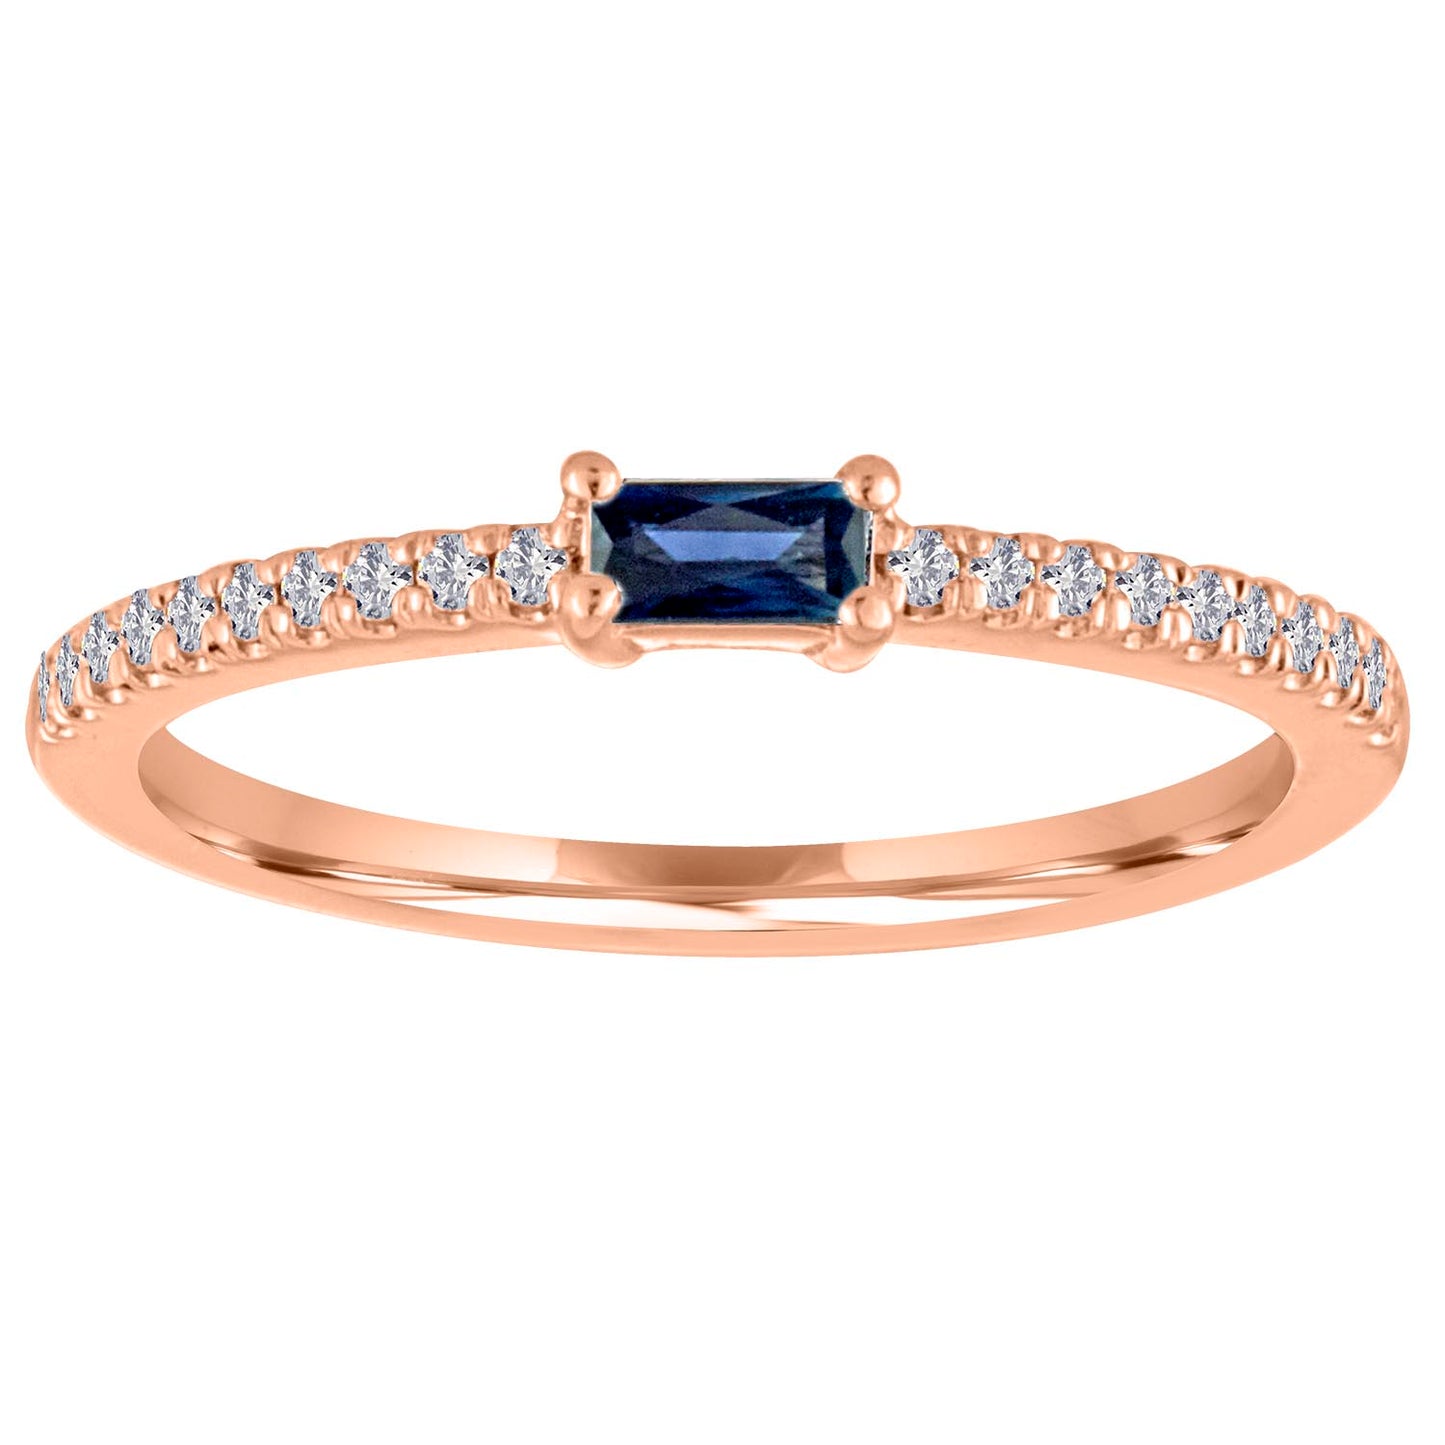 Rose gold skinny band with a sapphire baguette in the center and round diamonds on the shank.